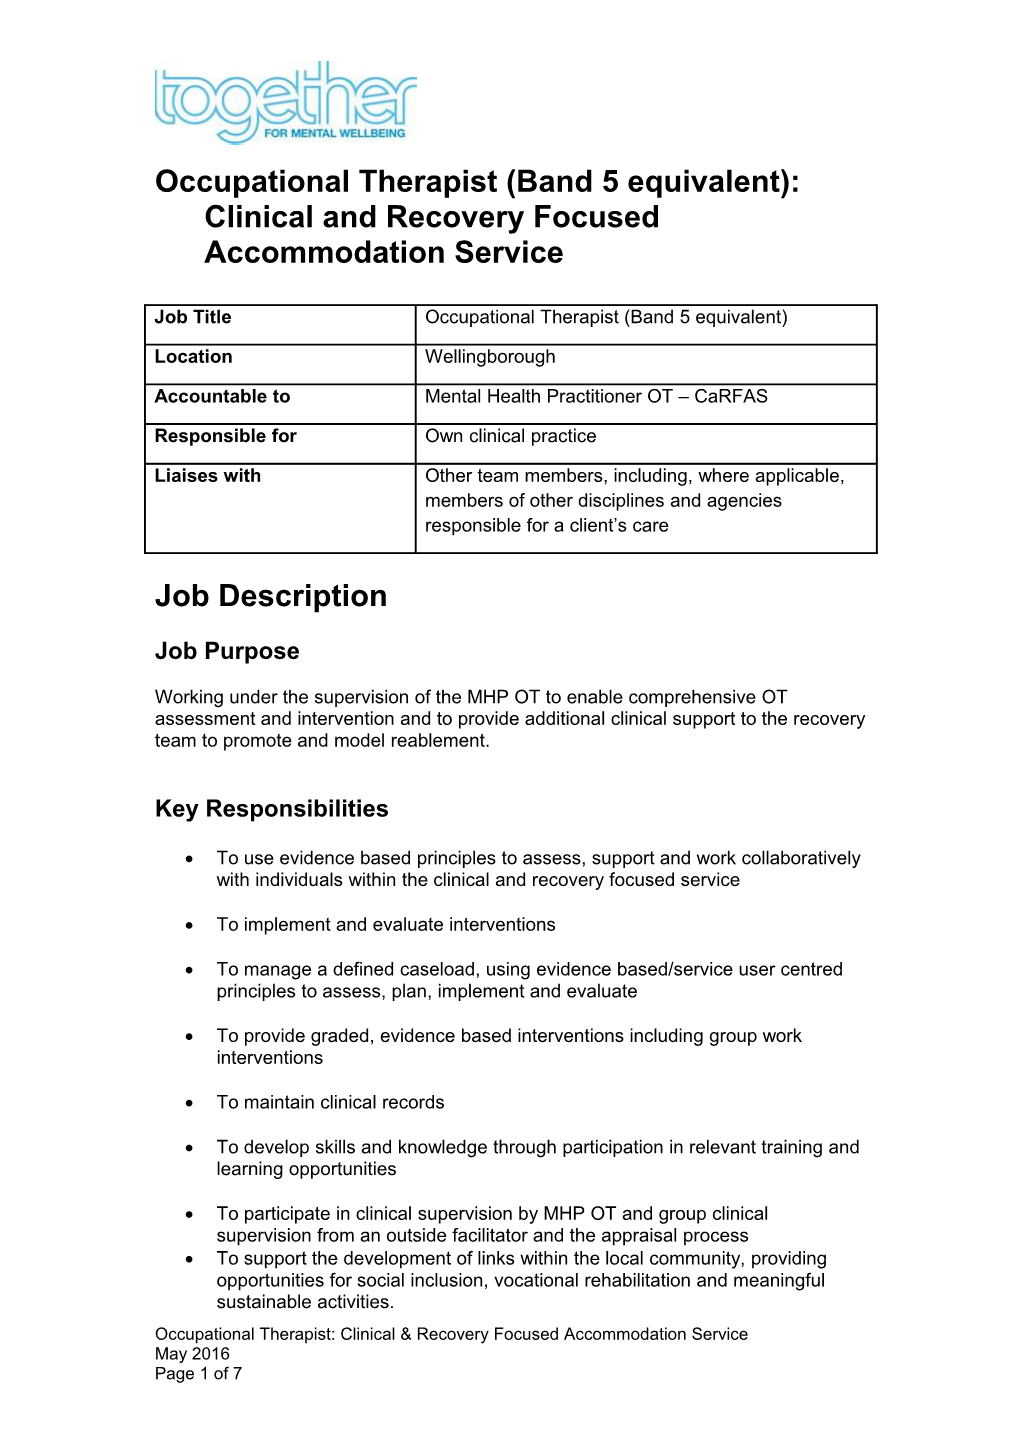 Occupational Therapist (Band 5 Equivalent): Clinical and Recovery Focused Accommodation Service